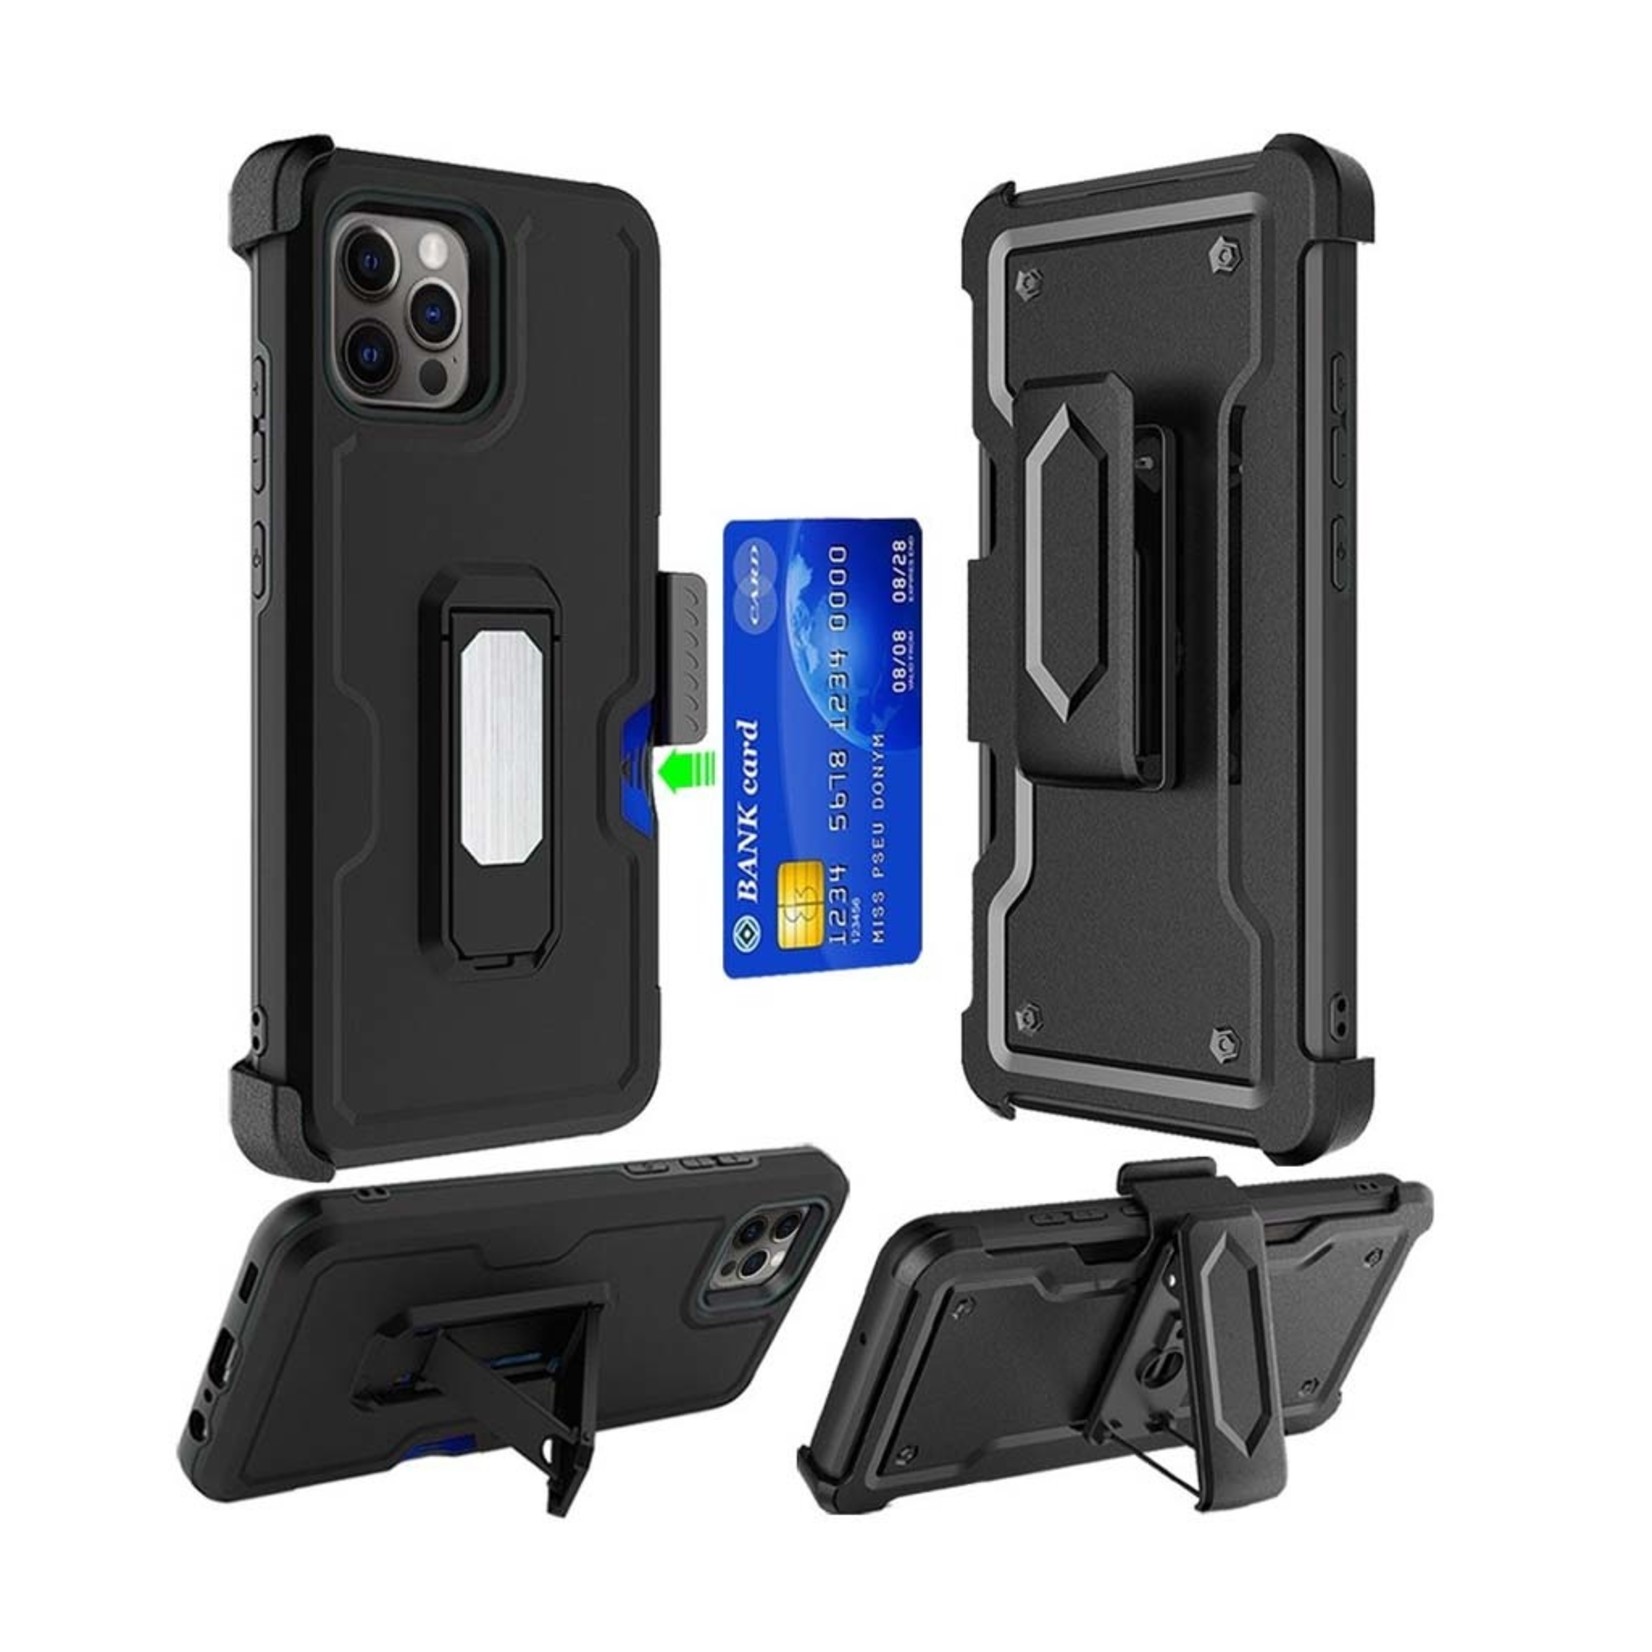 Armor CARD Holster Clip Case with Magnetic Kickstand for iPhone 11